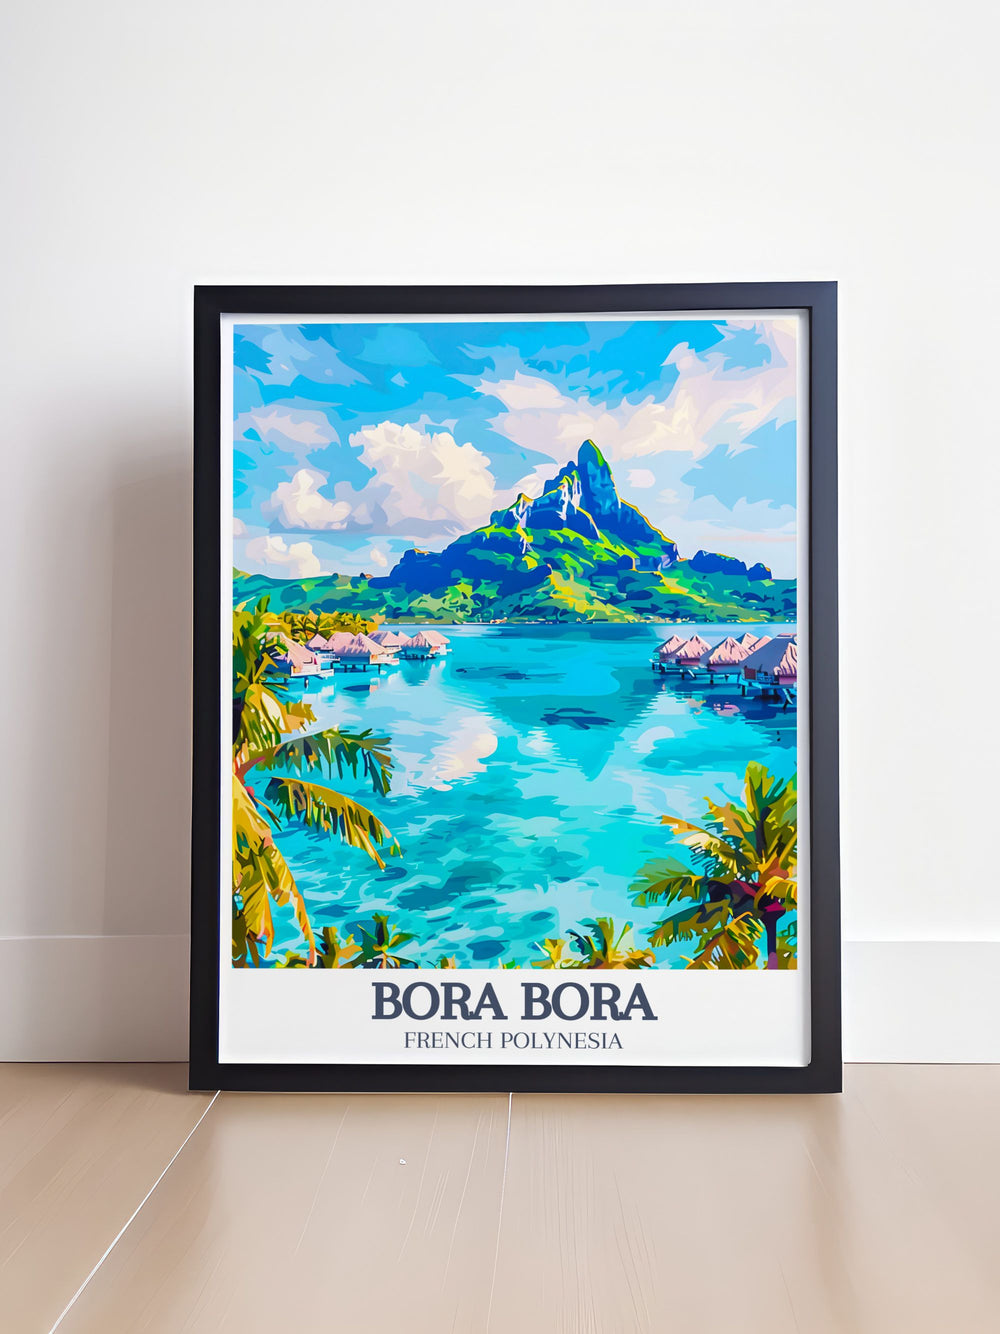 Retro travel poster featuring Mount Otemanu Bora Bora Yacht Club capturing the essence of French Polynesia this beautiful artwork is ideal for wall art and makes a unique gift for travel lovers who appreciate the breathtaking landscapes of Bora Bora island.